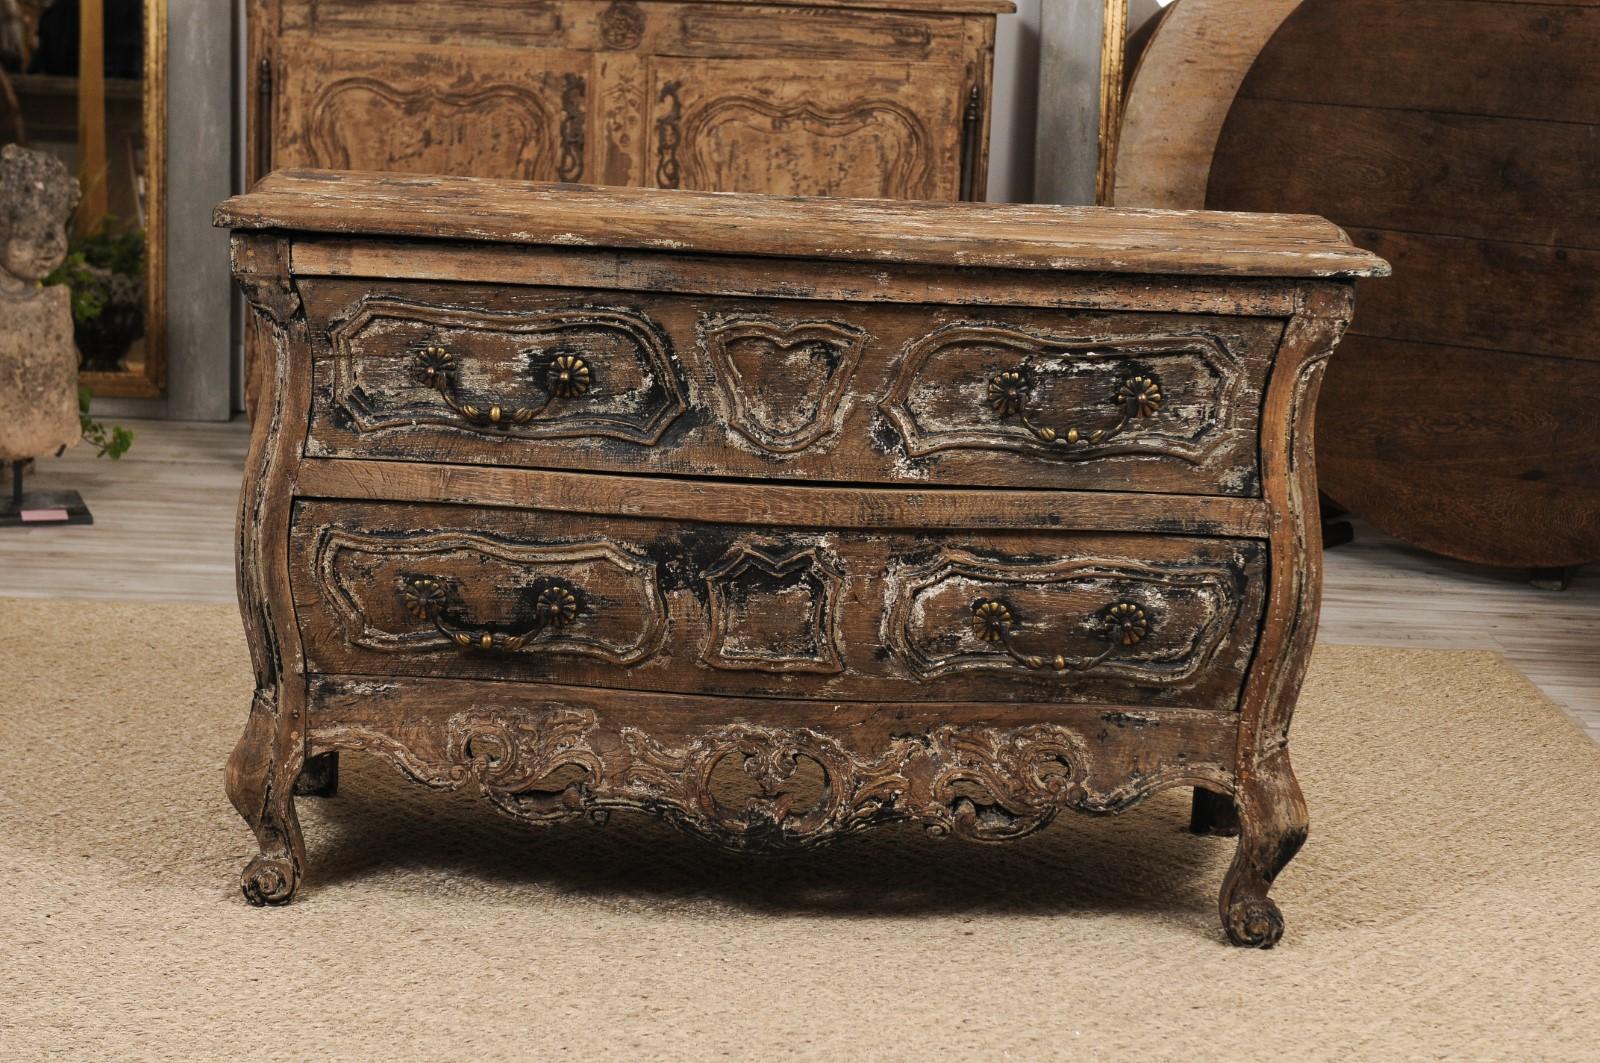 A French Louis XV style two-drawer 'commode en tombeau' from the late 19th century, with distressed finish, carved skirt and scrolled feet. This one was really a coup de foudre for us: we fell hard for the unusual, distressed finish, the intricate